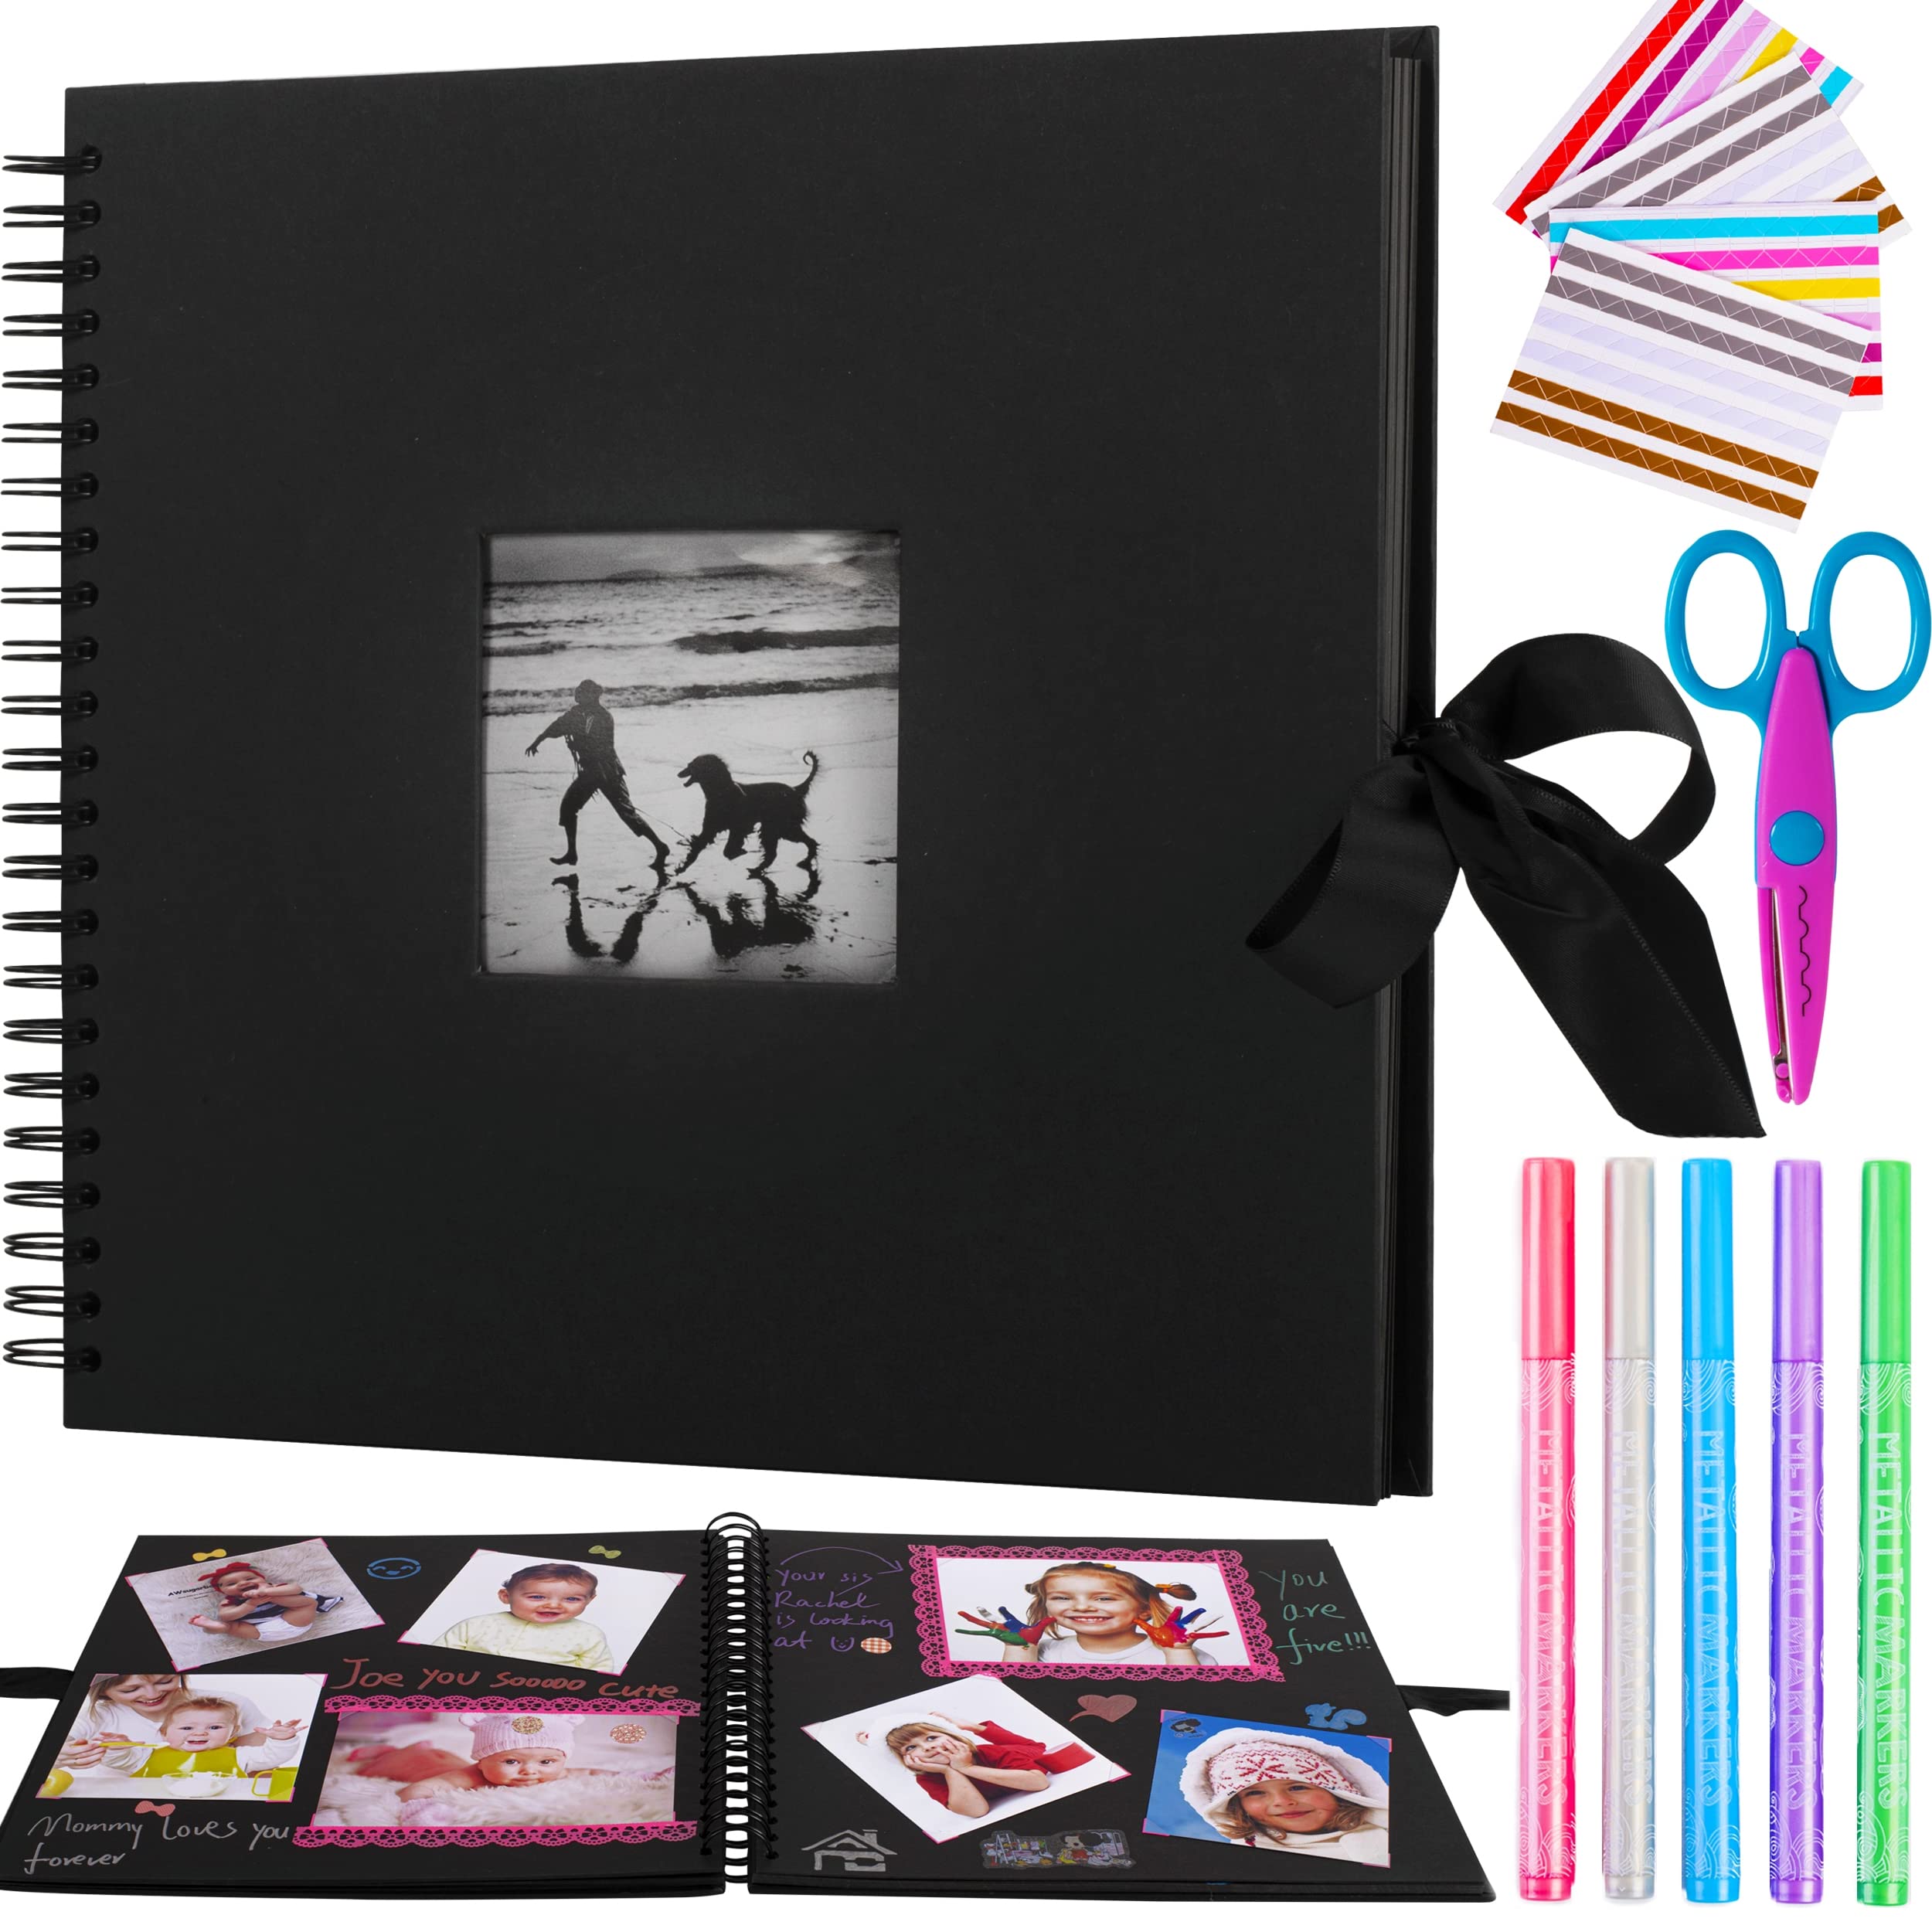 12x12 Inch Scrapbook Photo Album Wedding Guest book with 216 Photo Corners  and other accessories Perfect for Gifts or Yourself 60 Pages - Black